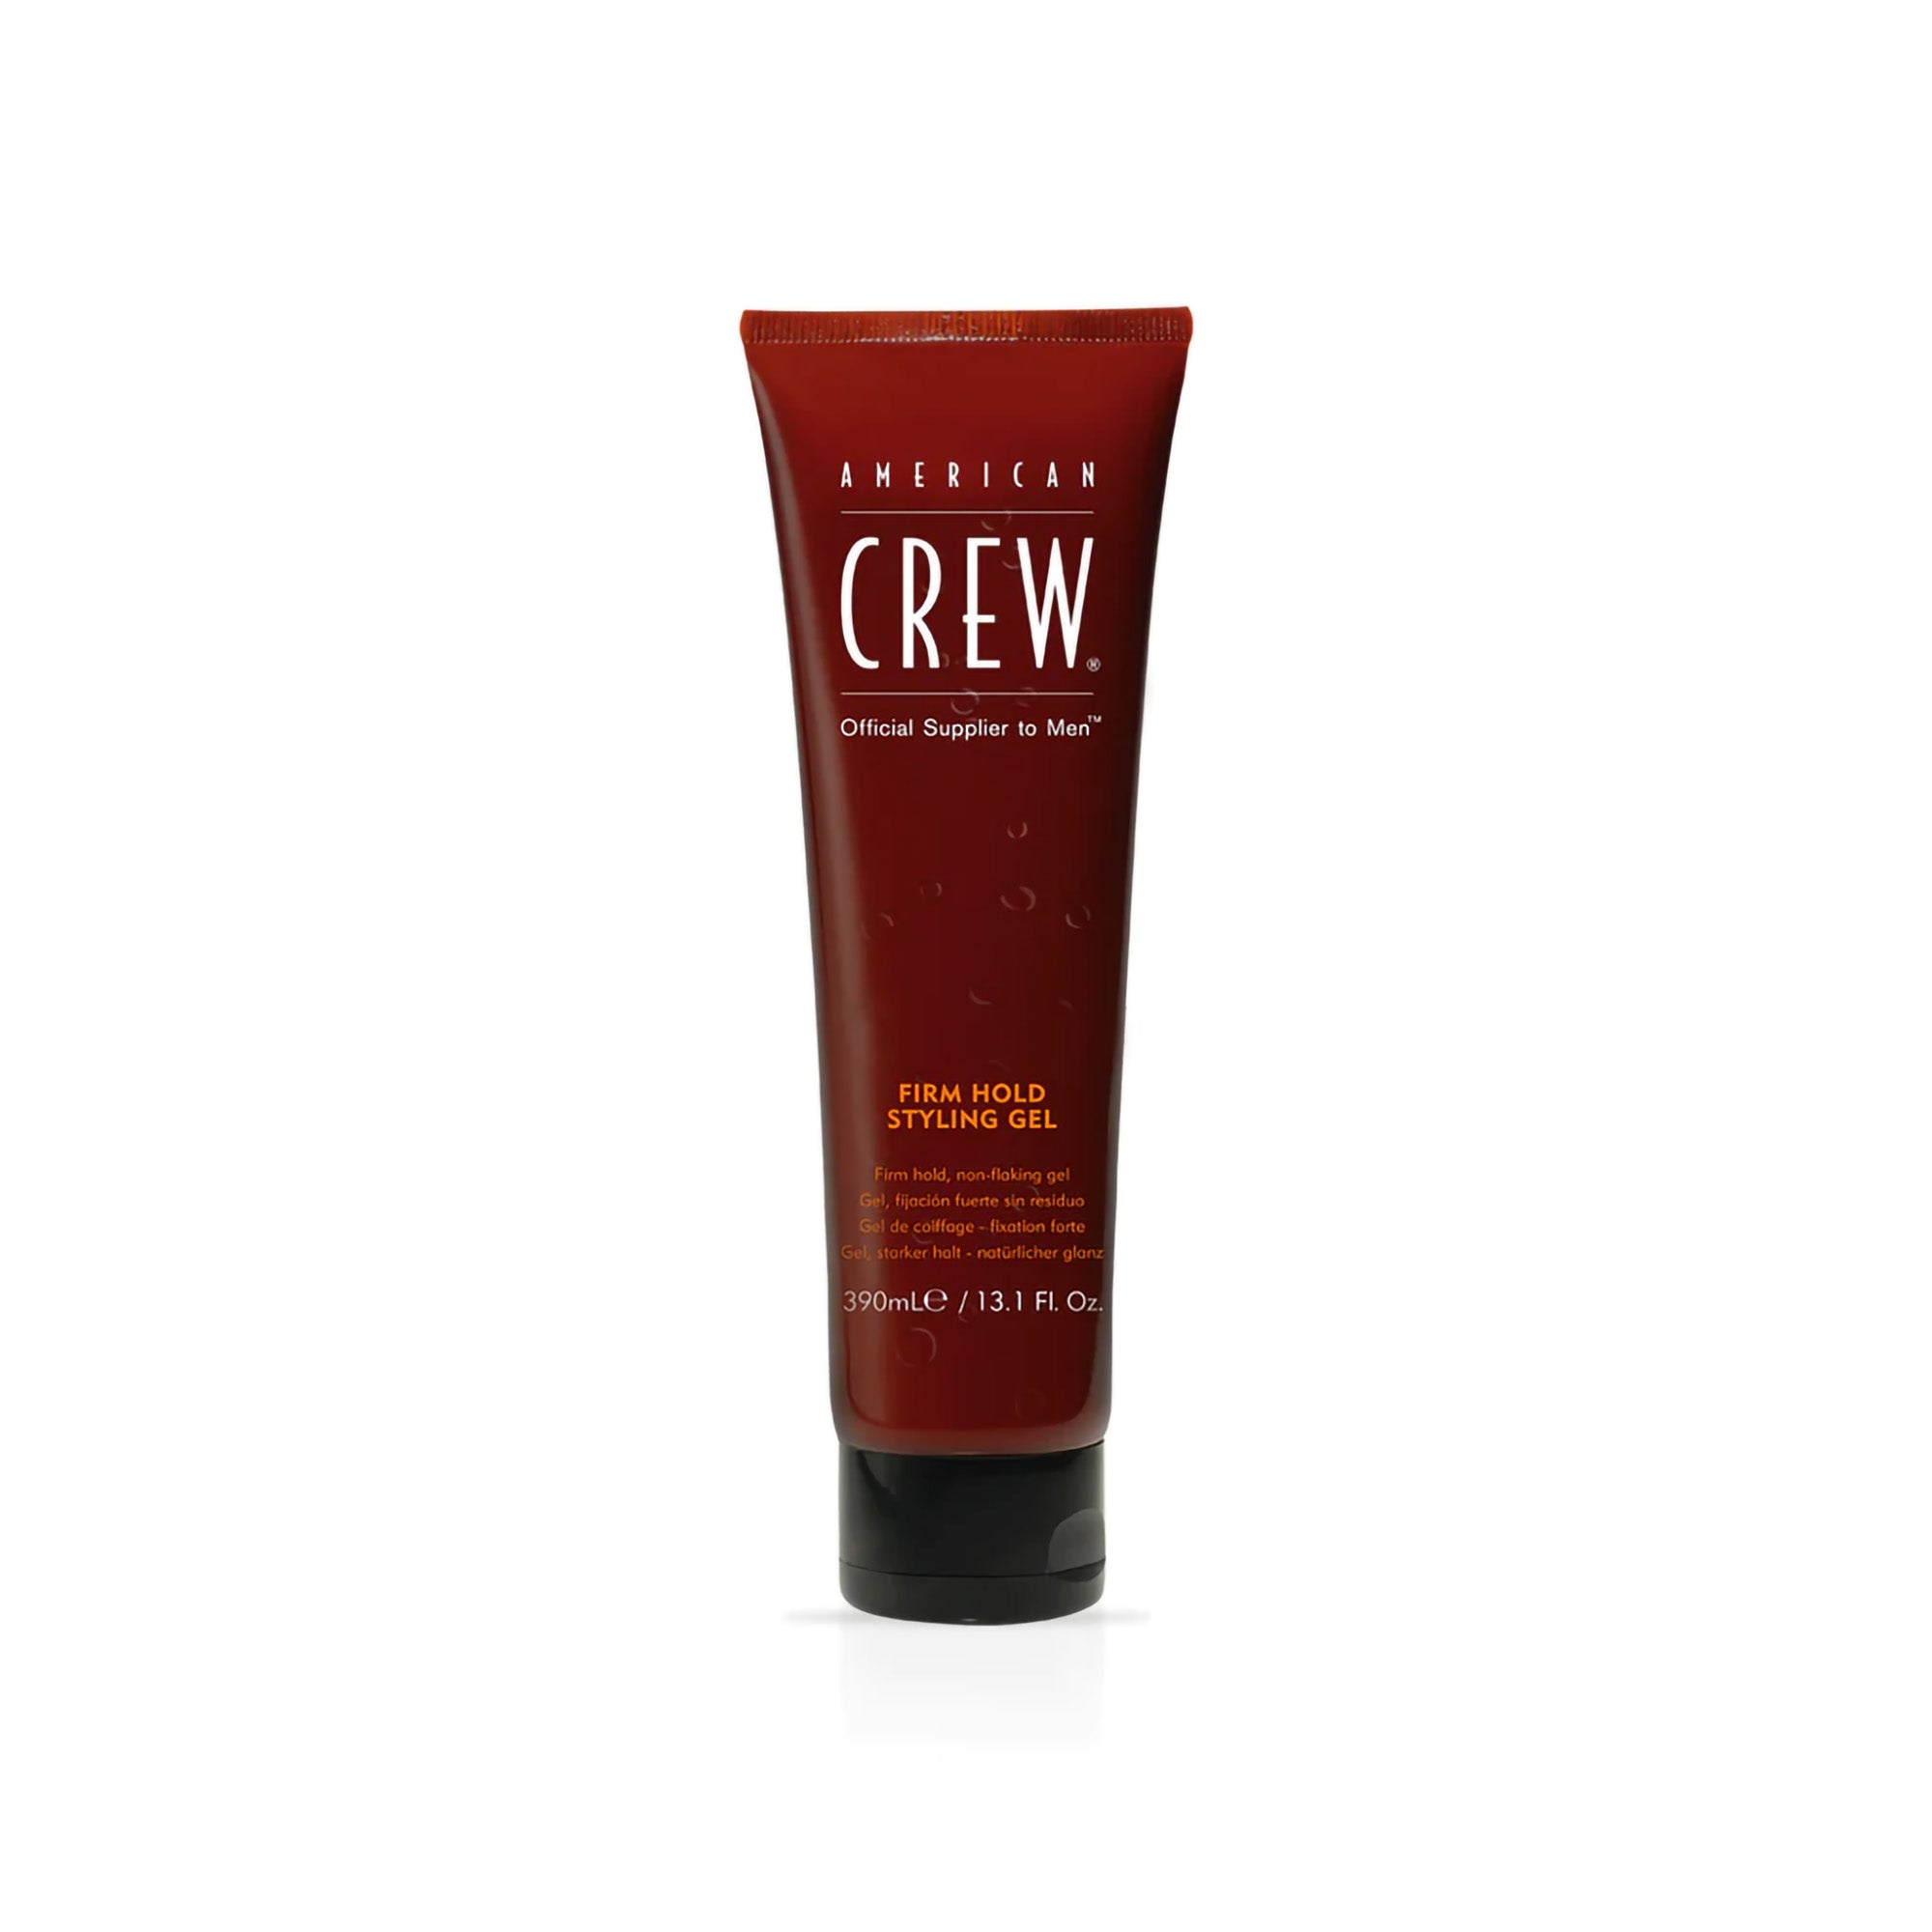 American Crew Firm Hold Styling Gel / 13 oz